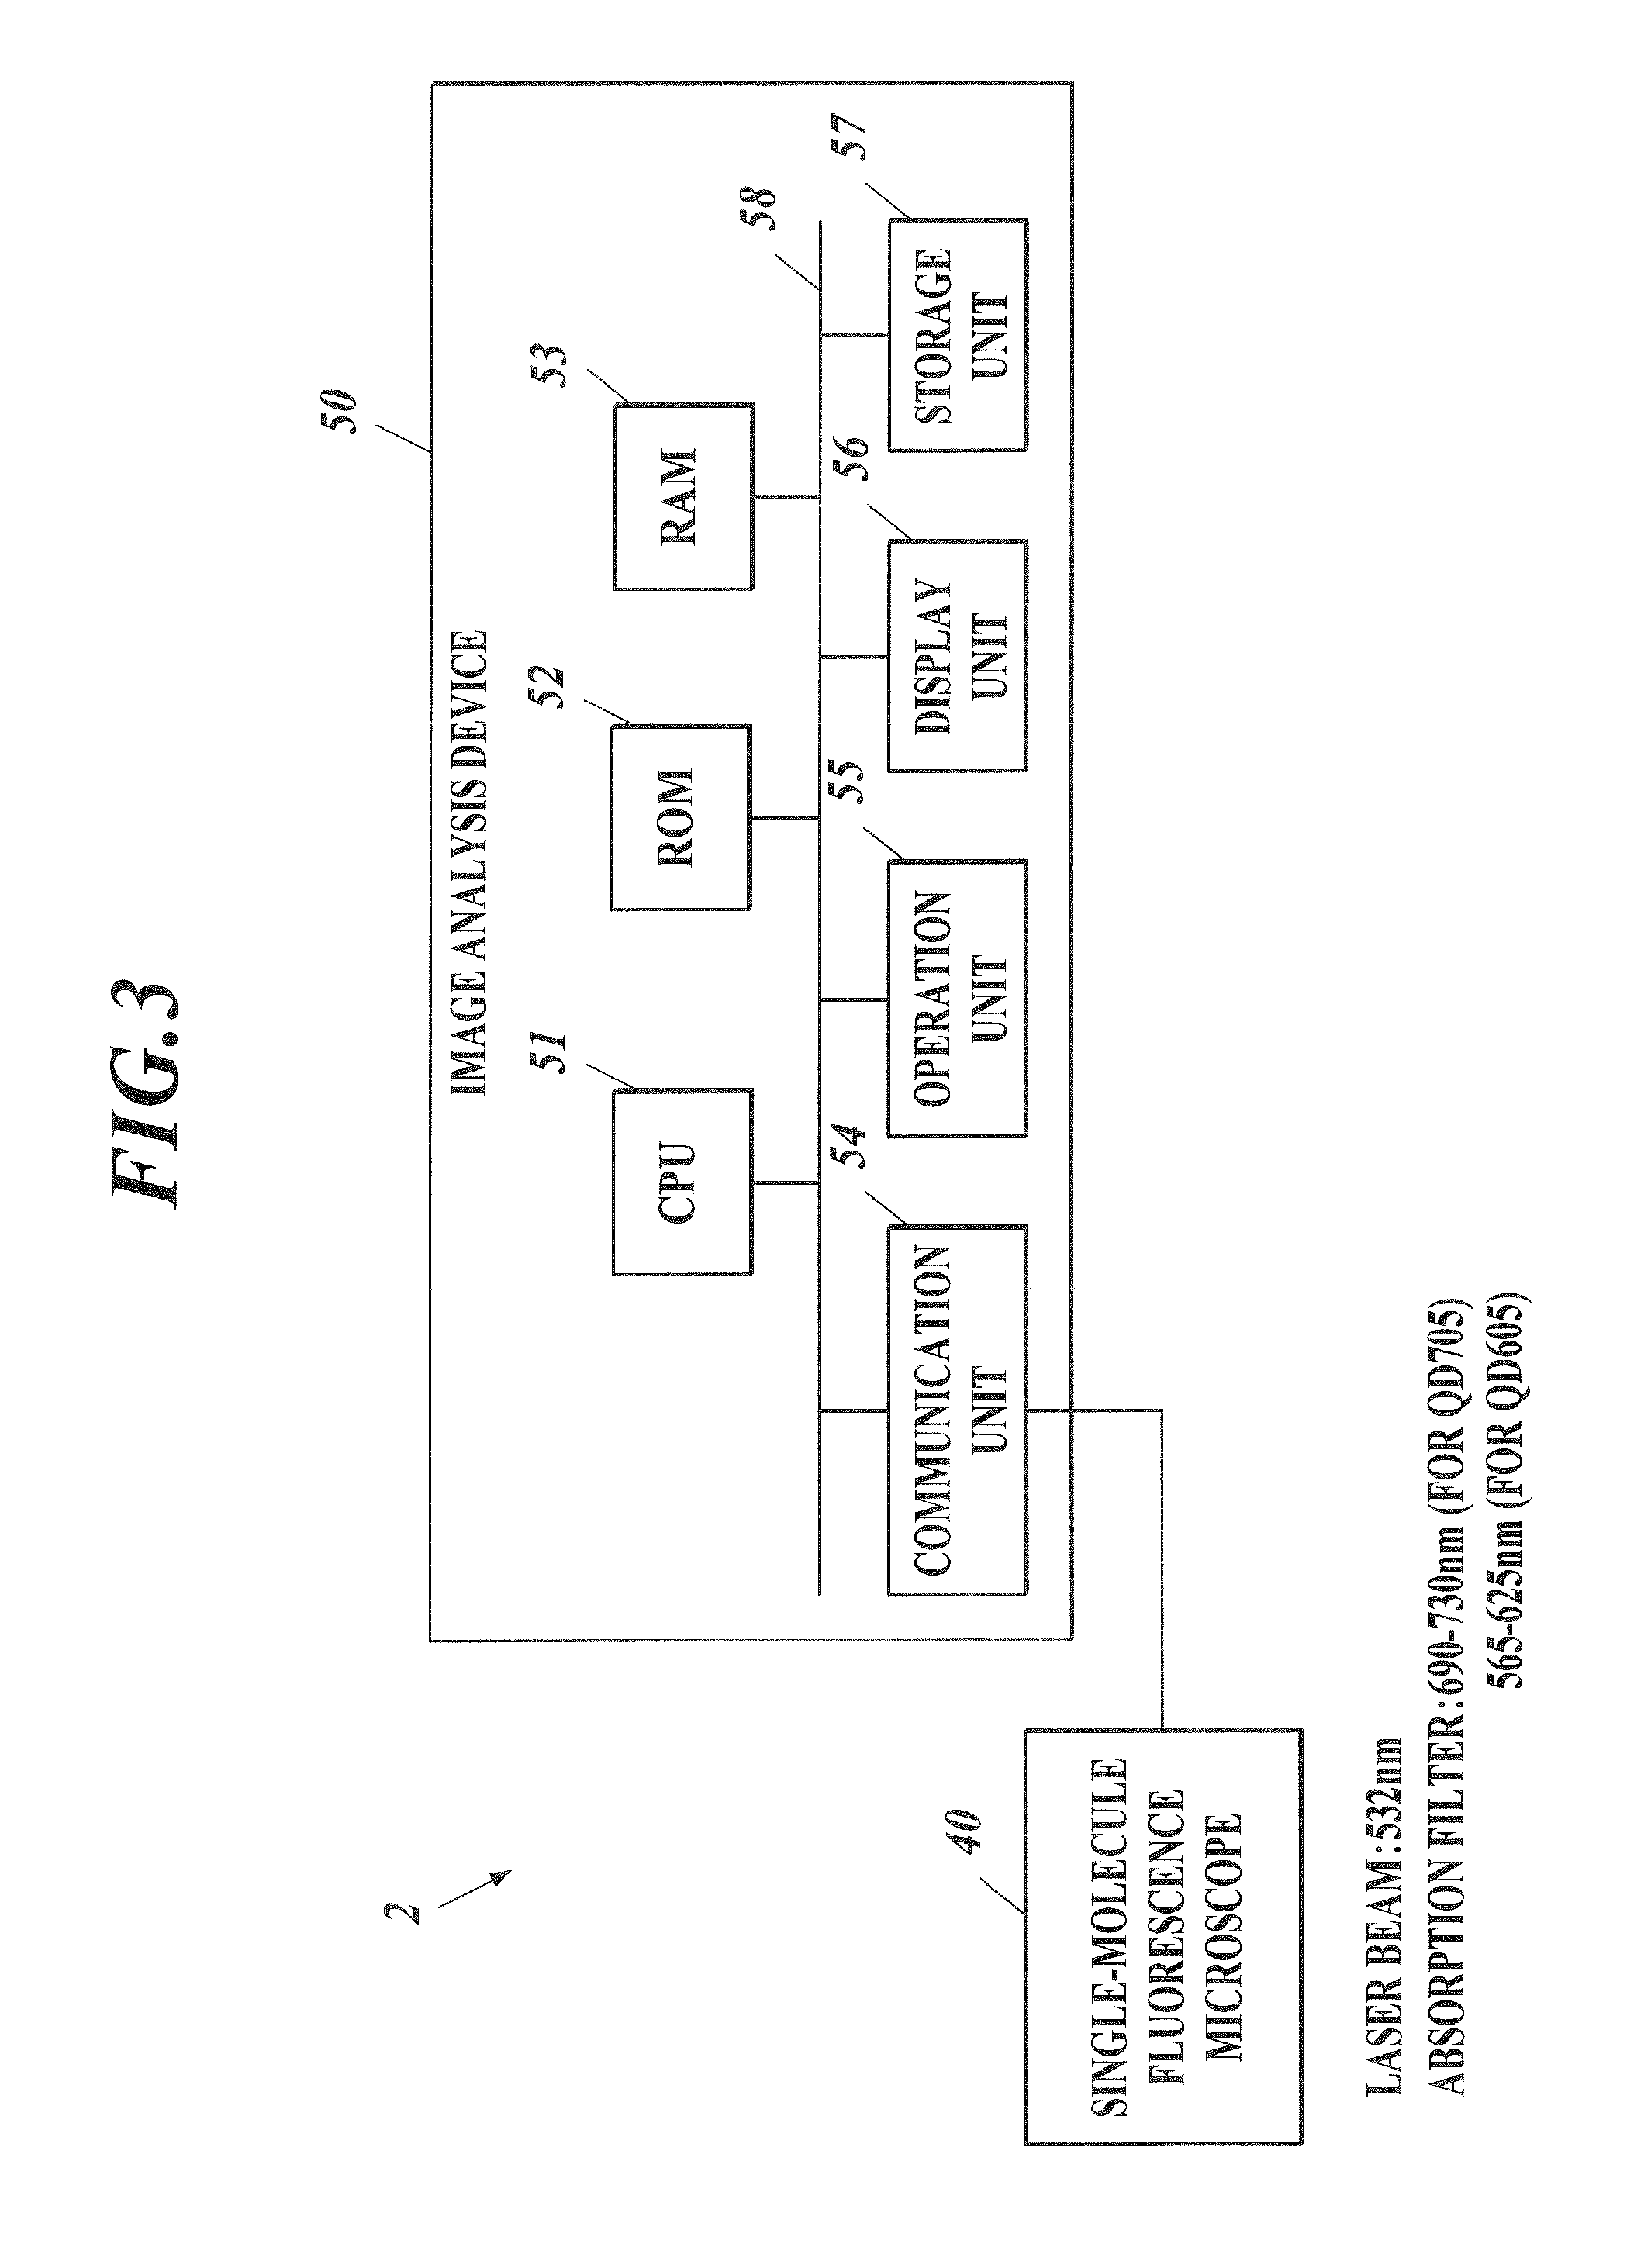 Method for detecting afferent lymph vessel inflow regions and method for identifying specific cells